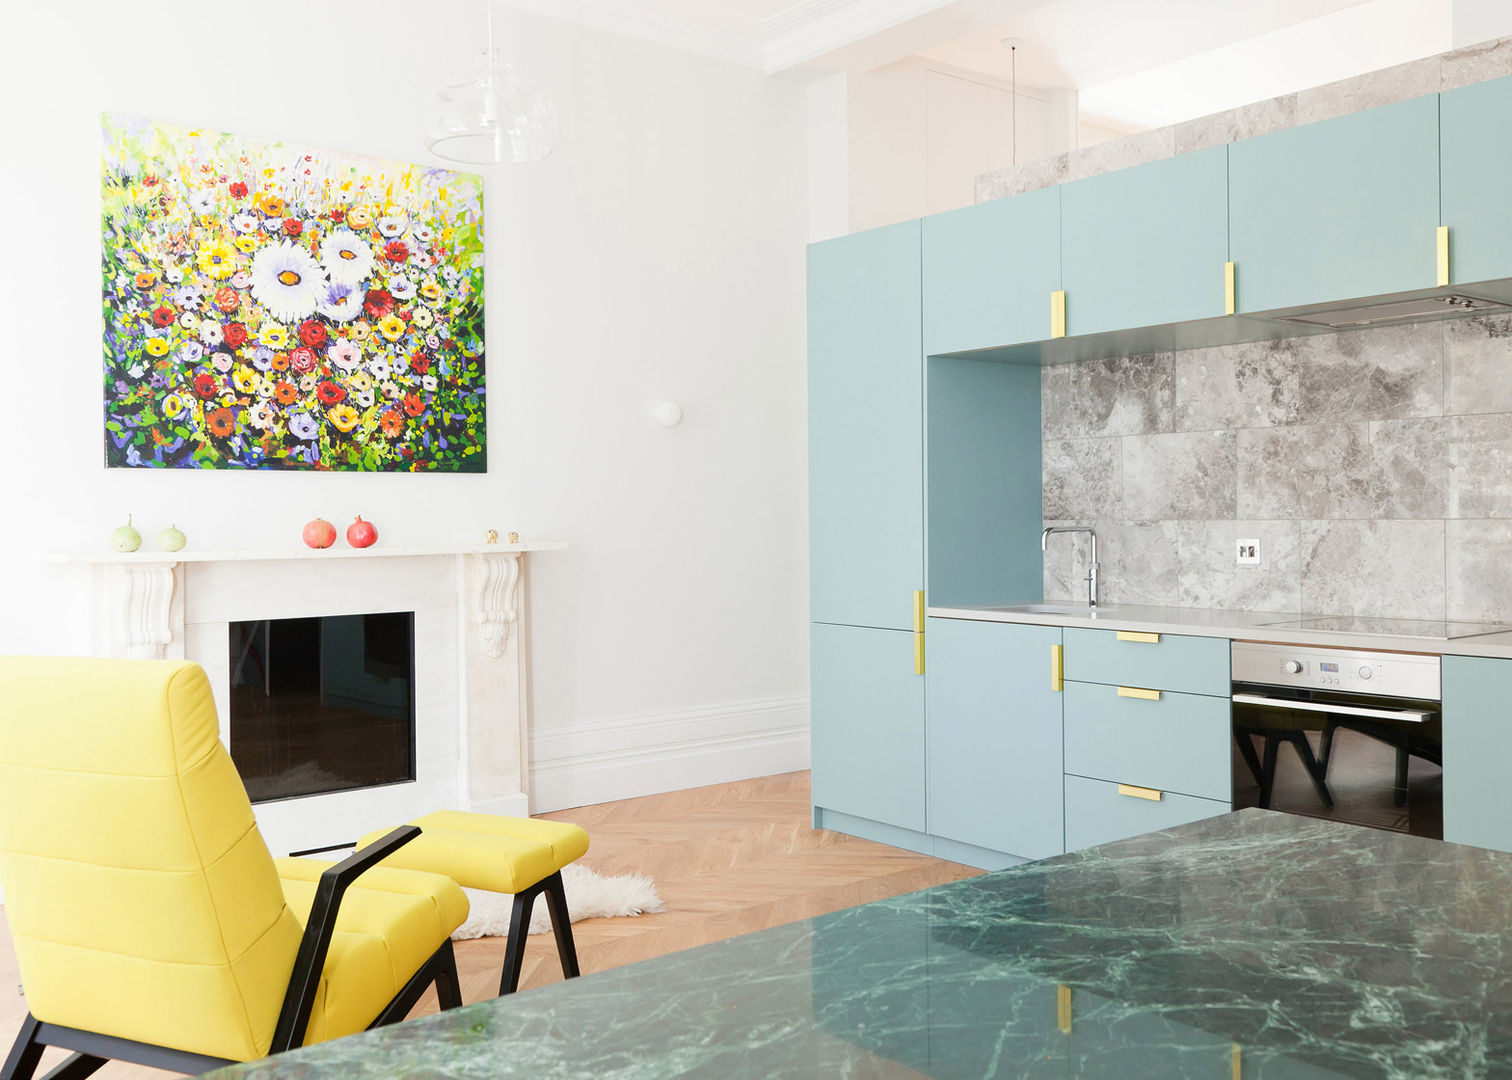 Westbourne Gardens NAKED Kitchens Cocinas modernas yellow chair,blue cabinets,gold handles,miele,oven,floral artwork,fireplace,modern,open plan,contemporary,mottled grey tiles